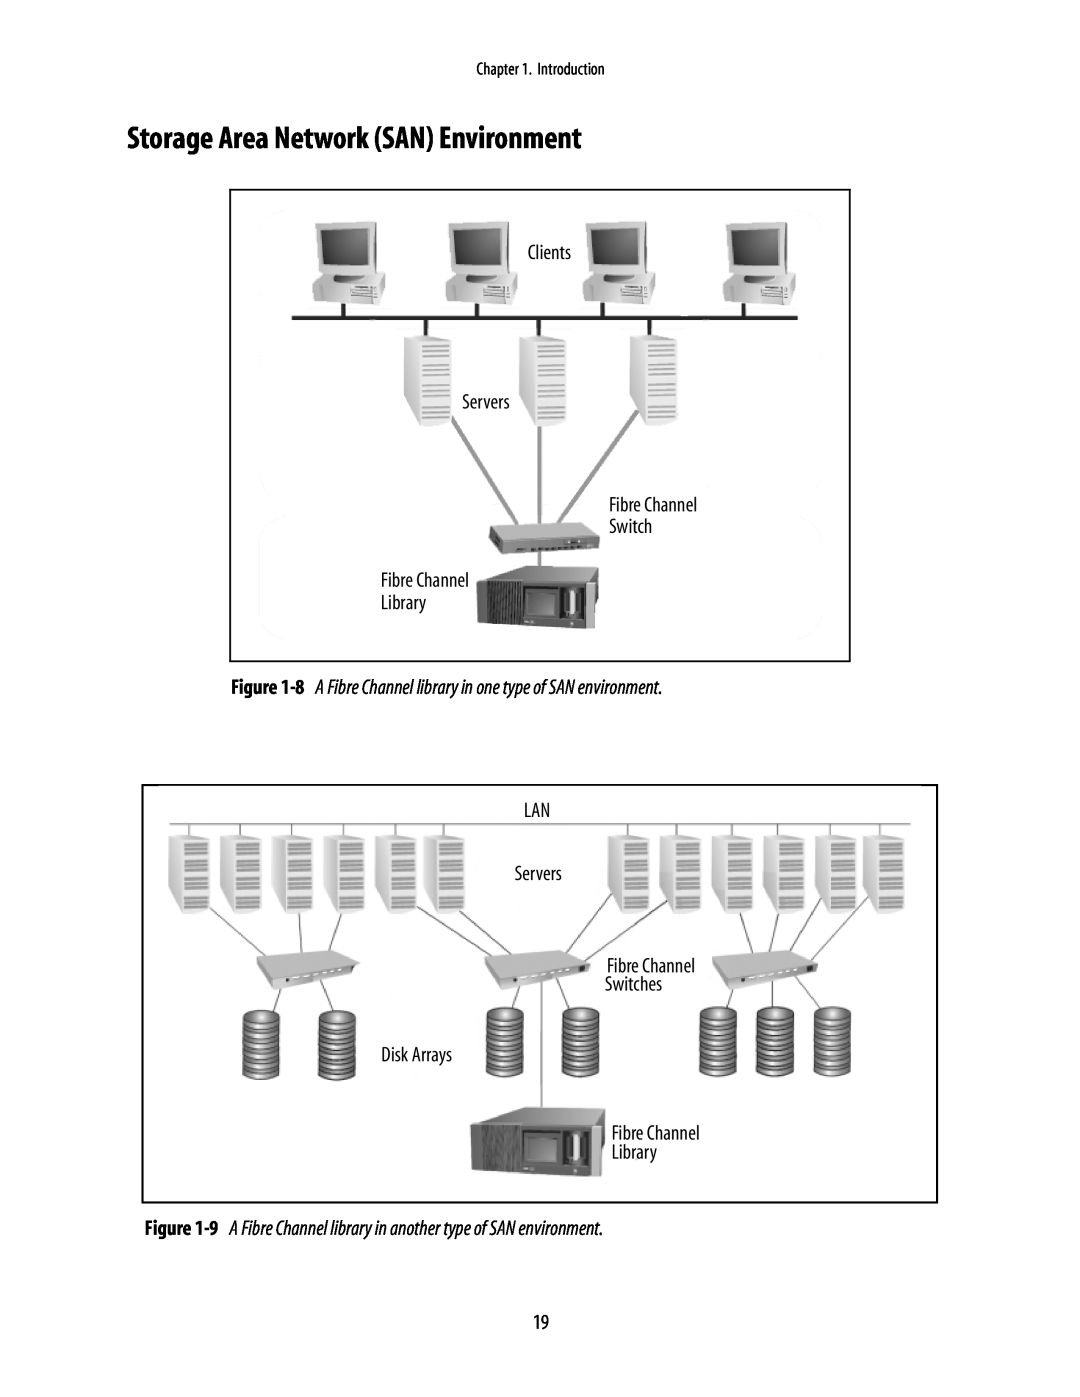 Spectra Logic 10000 manual Storage Area Network SAN Environment, 8 A Fibre Channel library in one type of SAN environment 